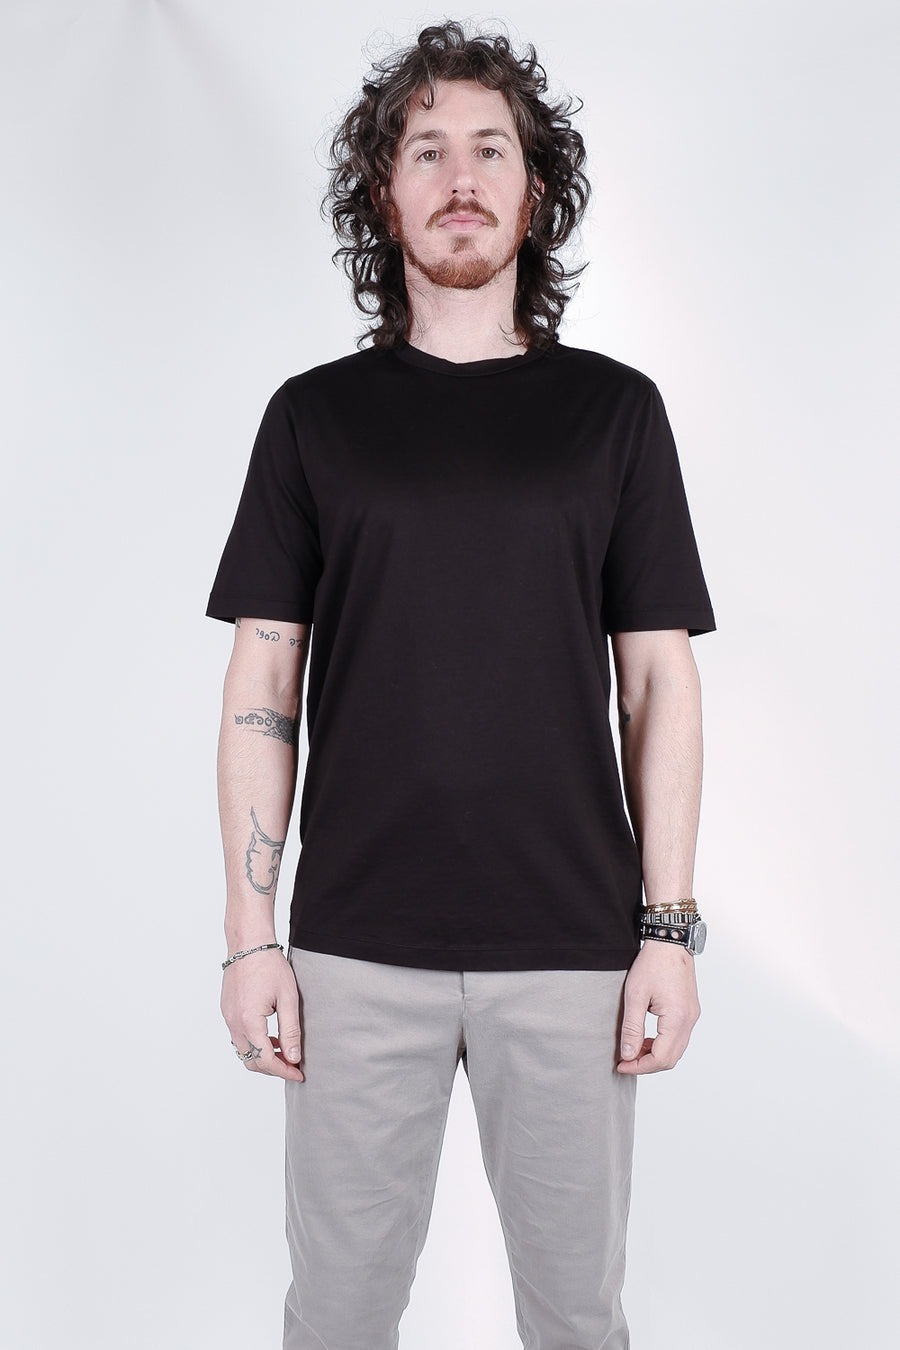 Buy the Transit Regular Fit Cotton Jersey T-Shirt in Black at Intro. Spend £50 for free UK delivery. Official stockists. We ship worldwide.